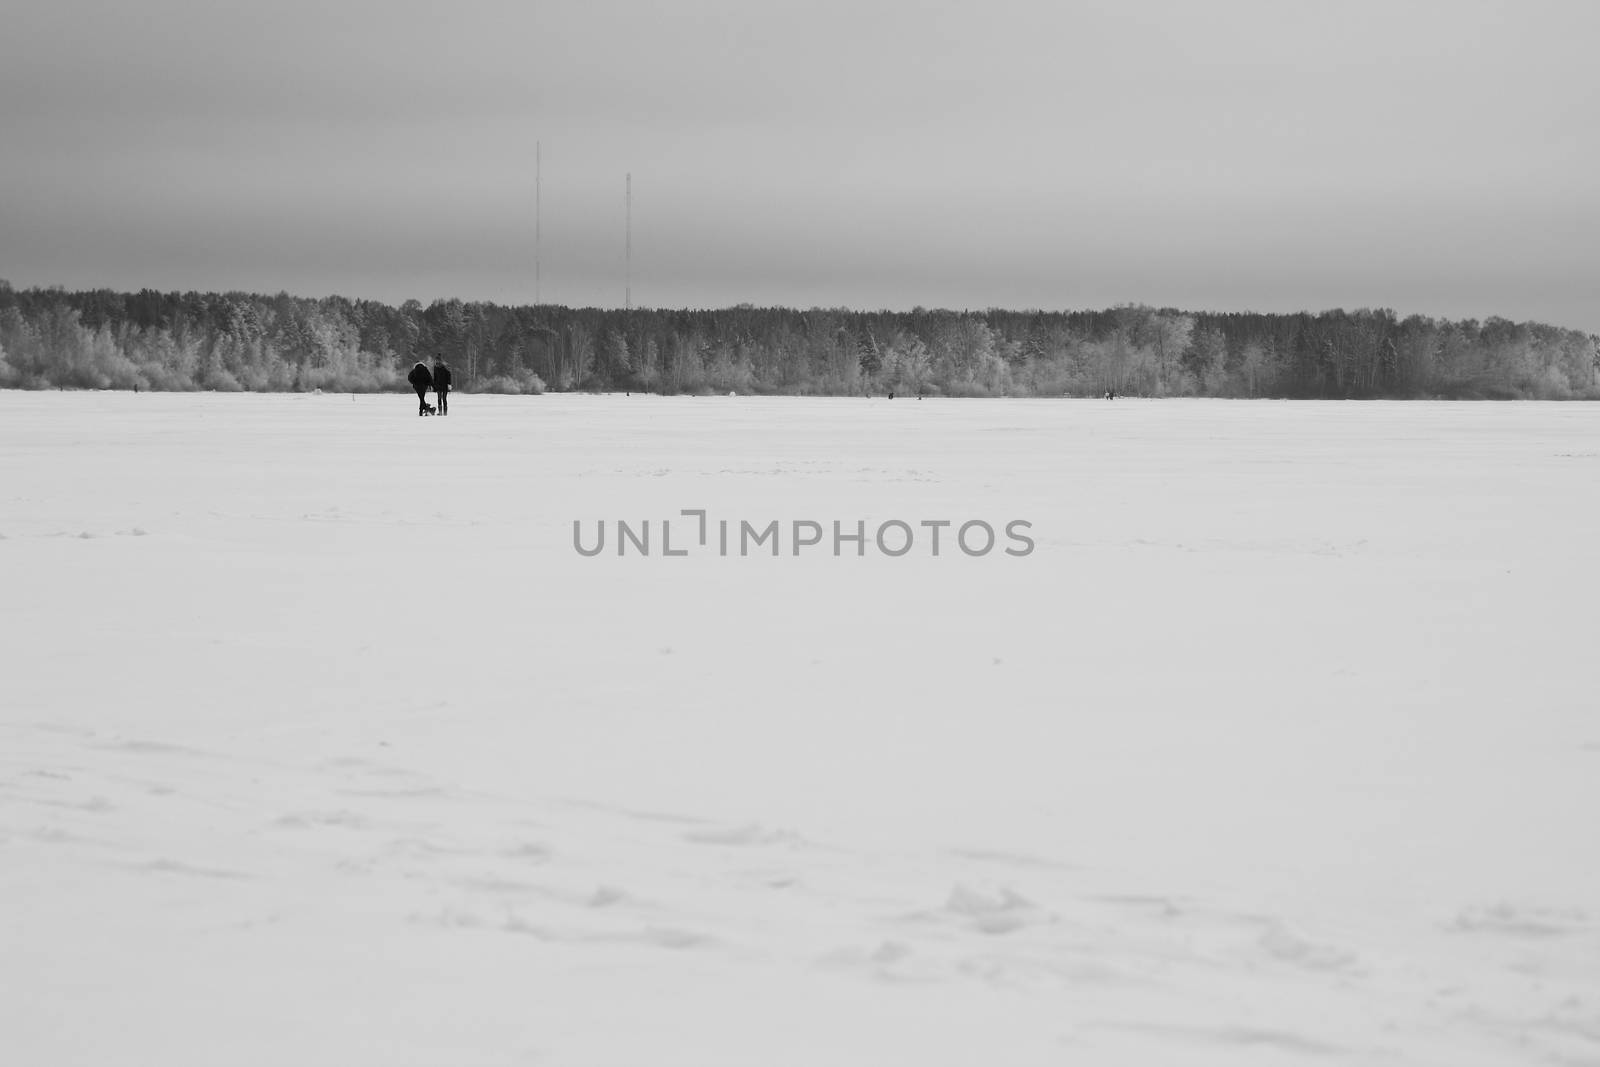 Fishermans on ice for fishing with equipments